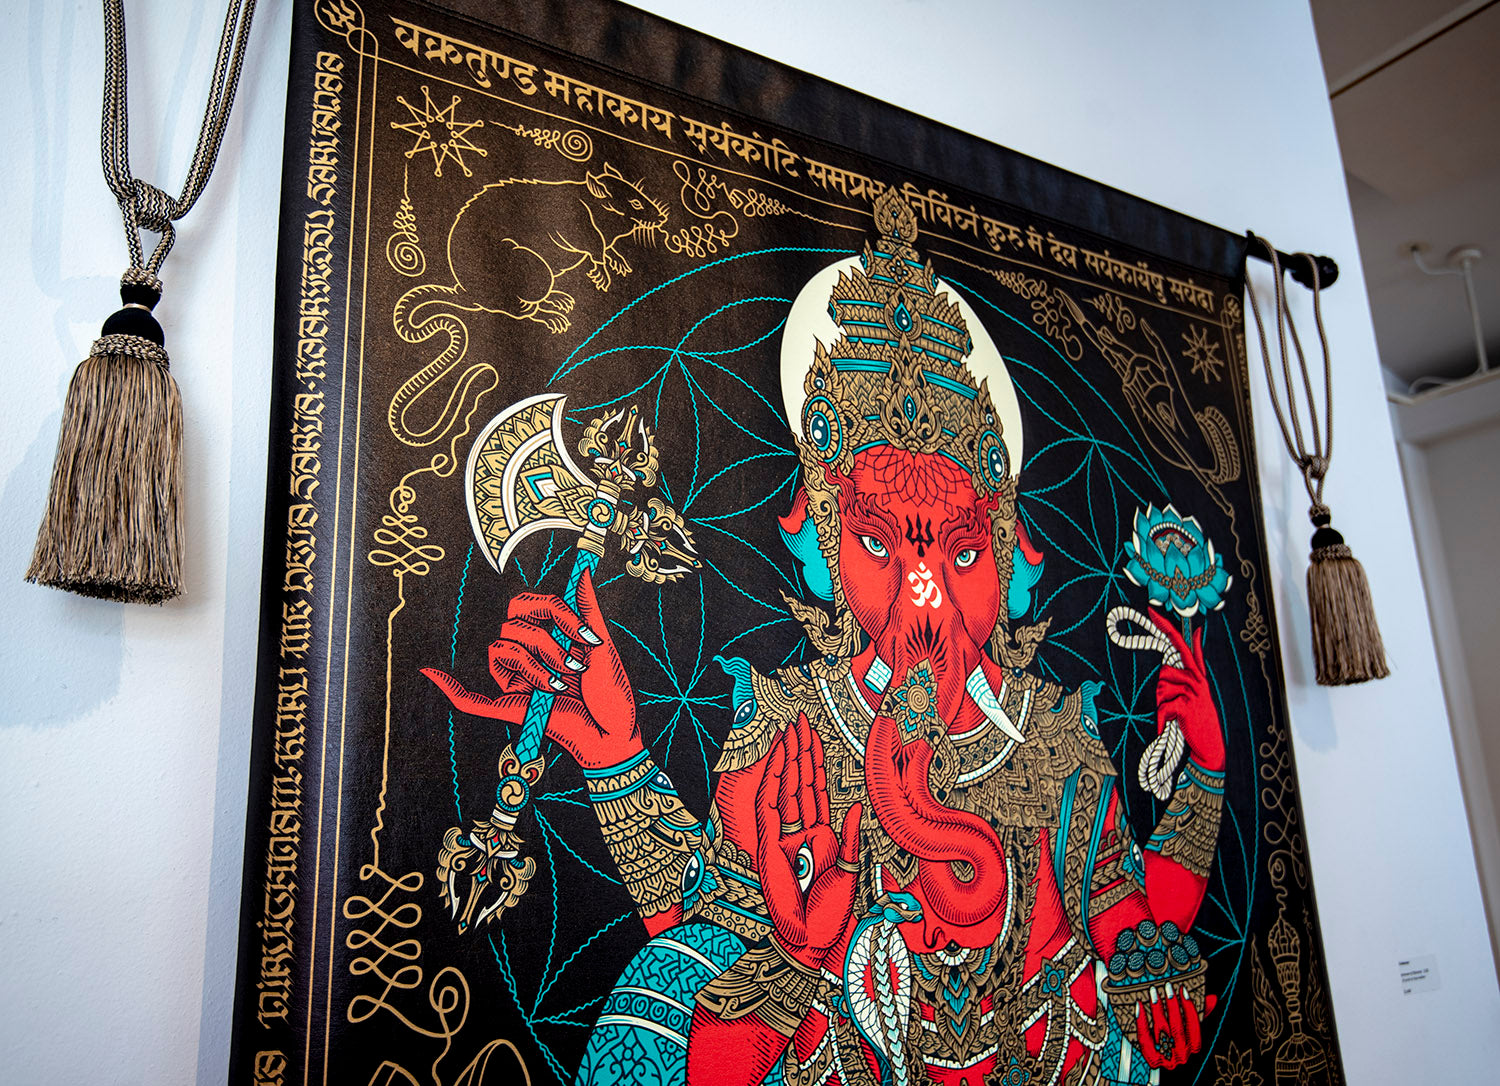 Remover of Obstacles: 6ft. Hanging Tapestry